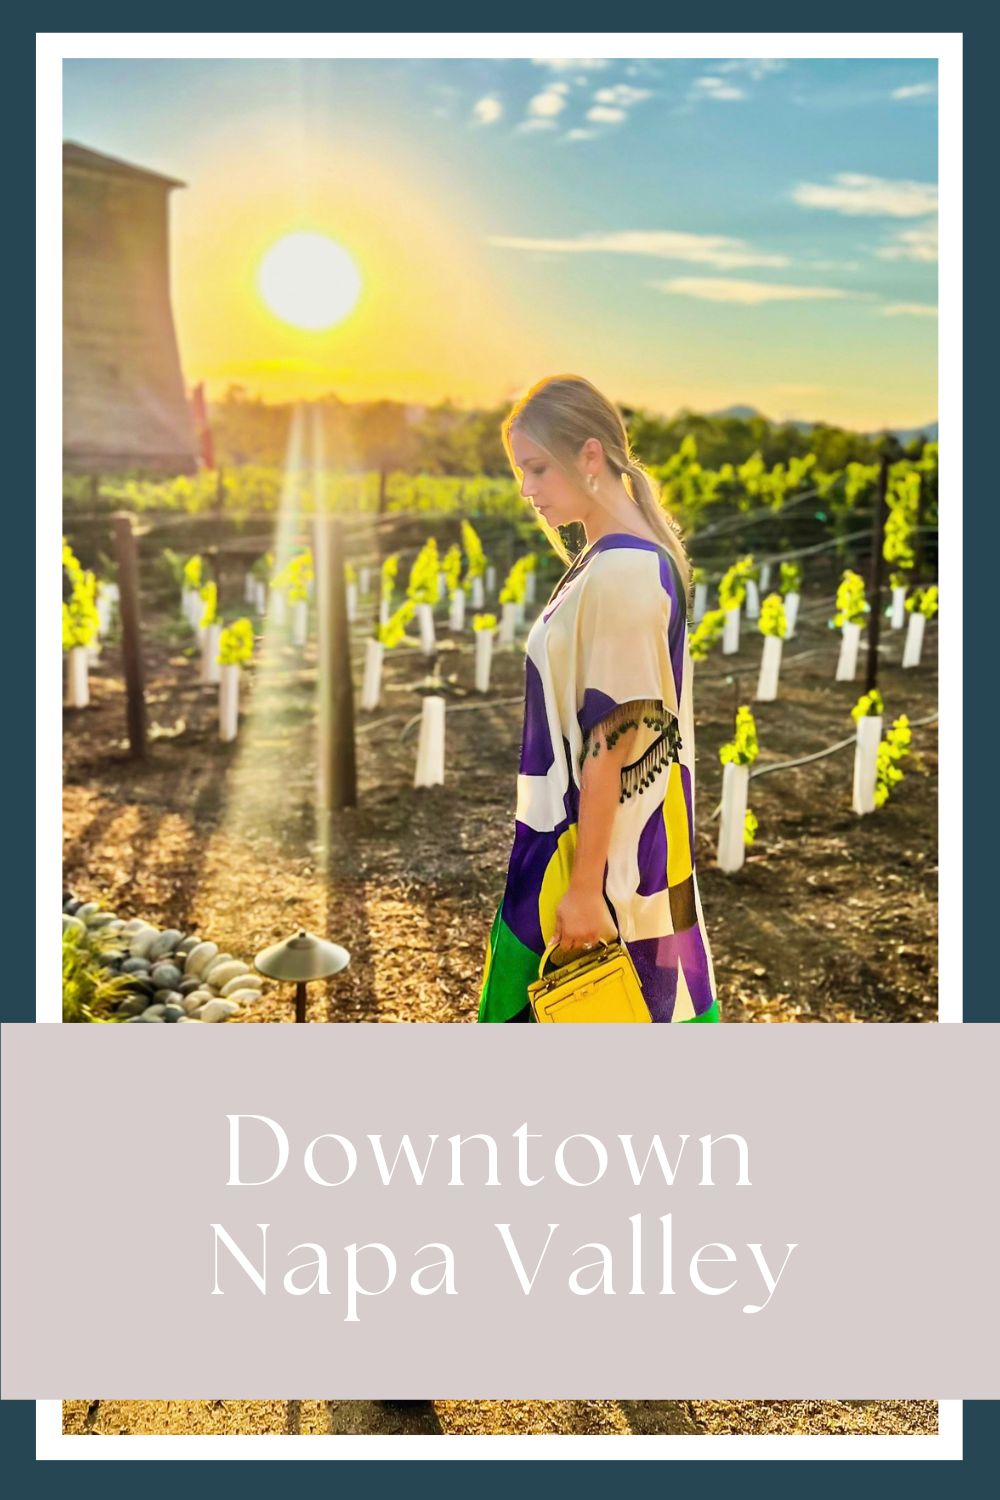 downtown Napa valley by My Next Pin